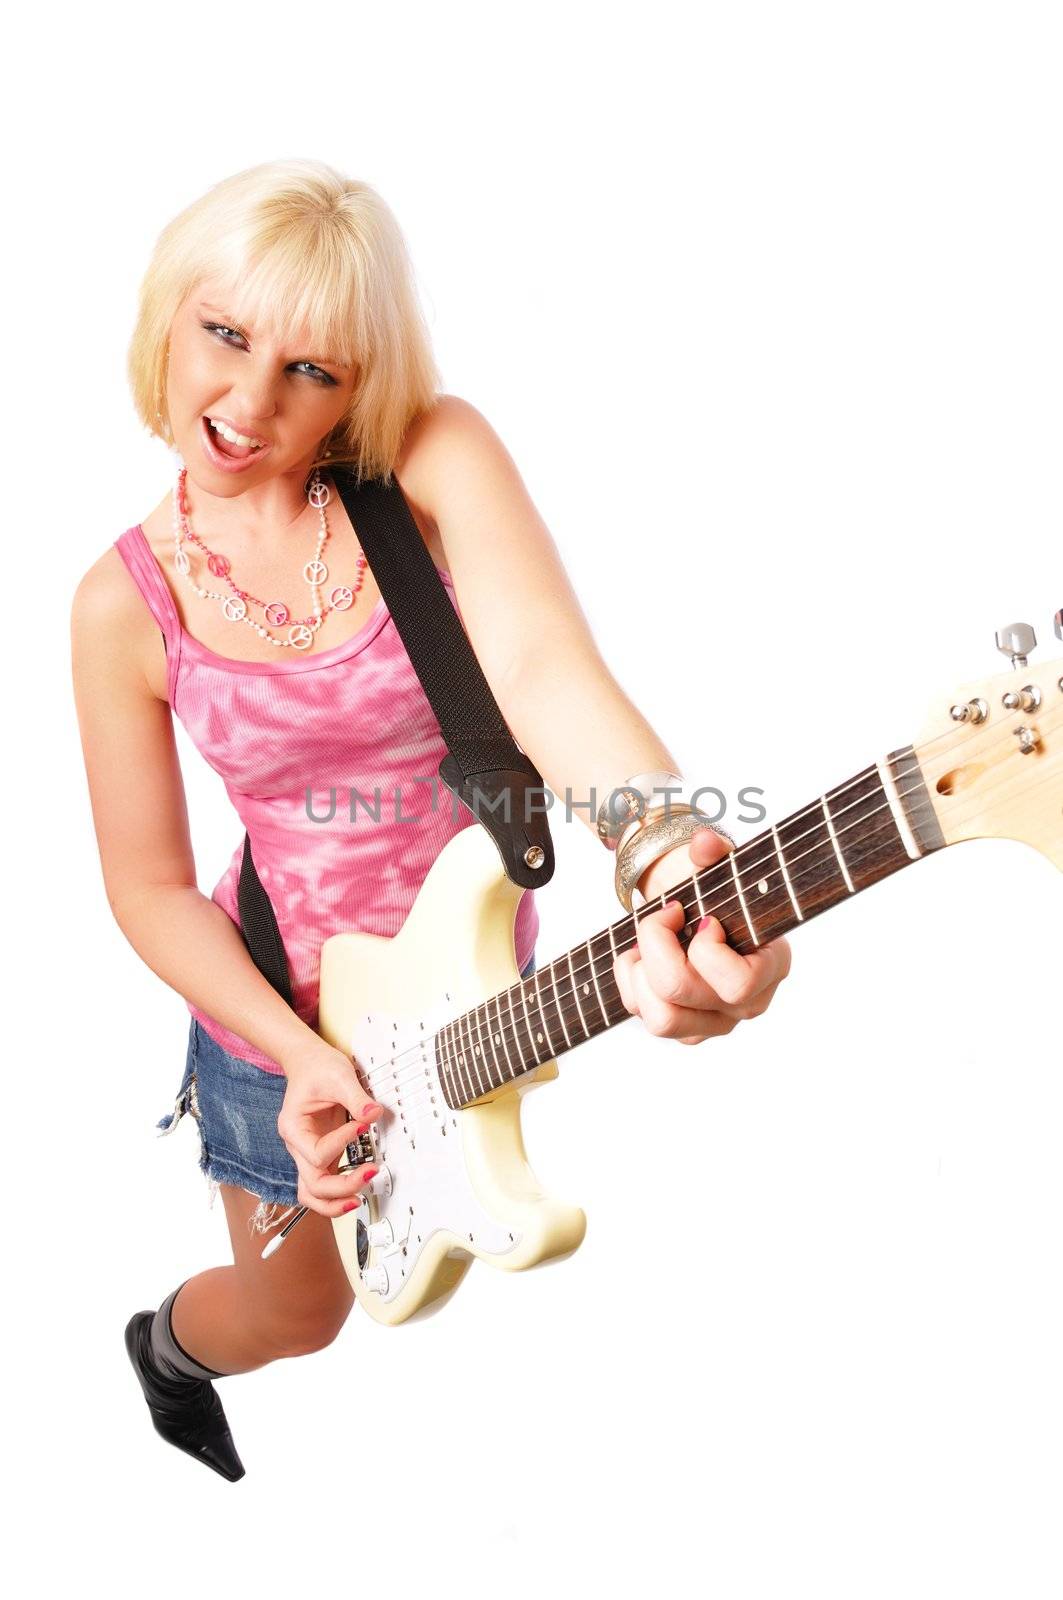 play guitar by PDImages